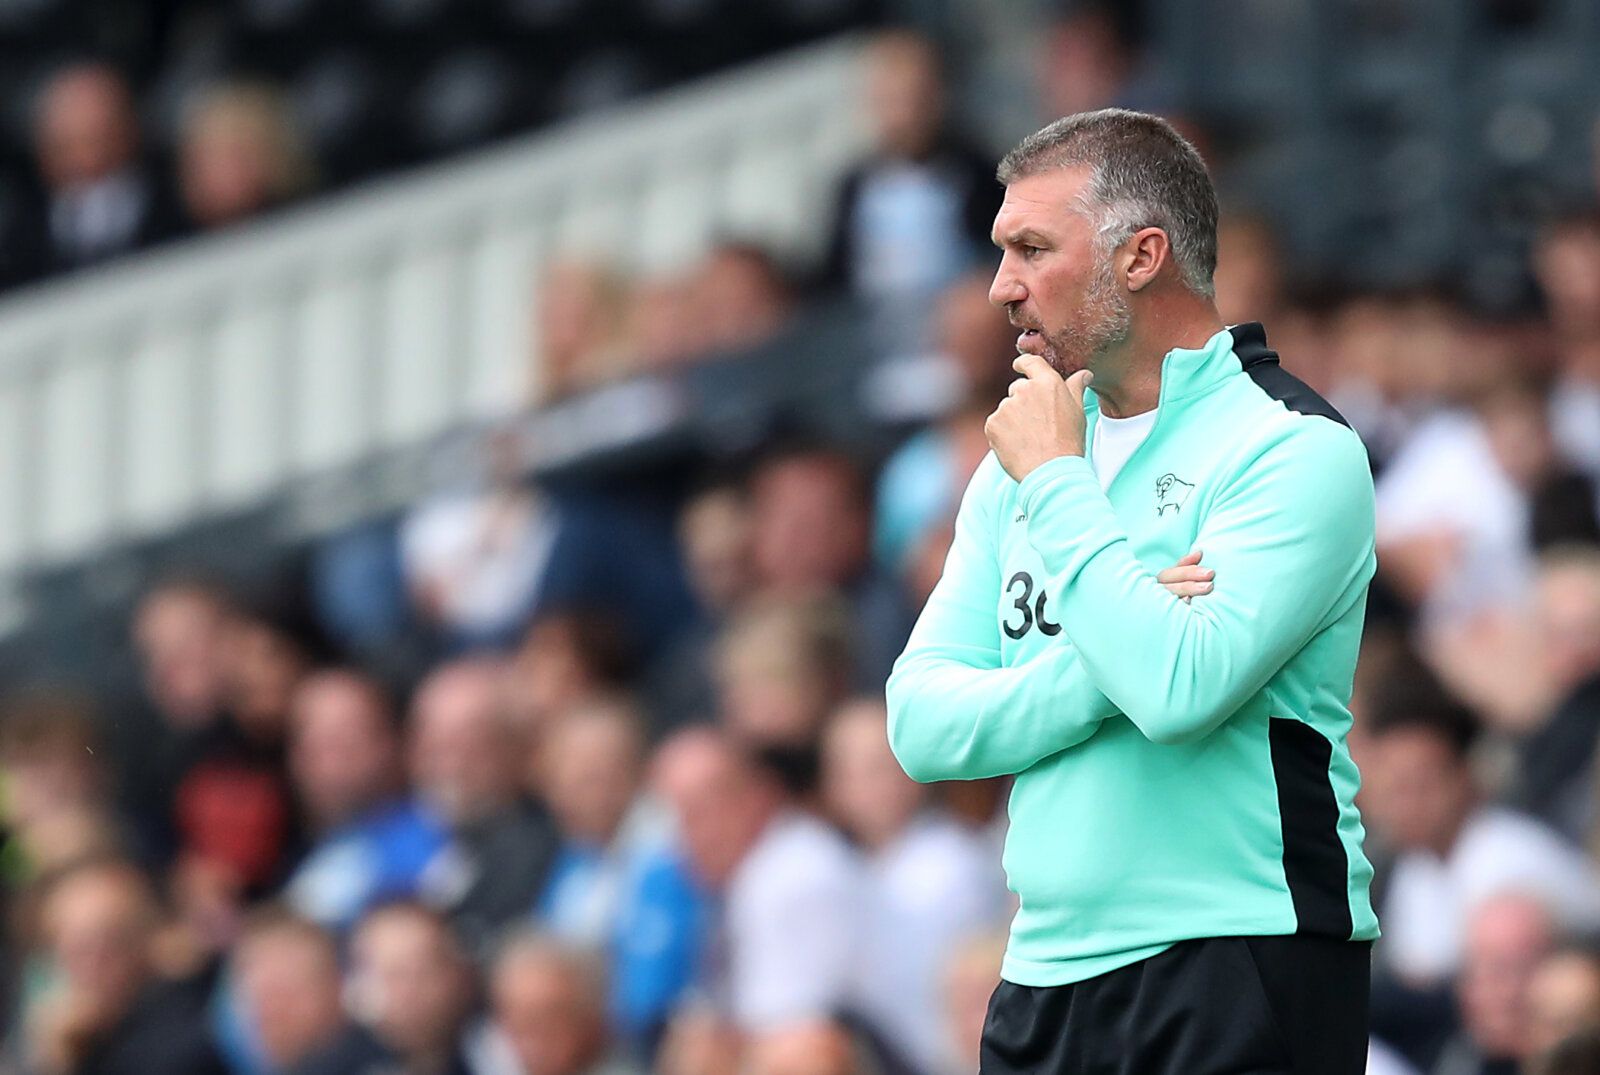 Britain Football Soccer - Derby County v Blackburn Rovers - Sky Bet Championship - iPro Stadium - 24/9/16
Nigel Pearson manager of Derby County
Mandatory Credit: Action Images / John Clifton
Livepic
EDITORIAL USE ONLY. No use with unauthorized audio, video, data, fixture lists, club/league logos or 